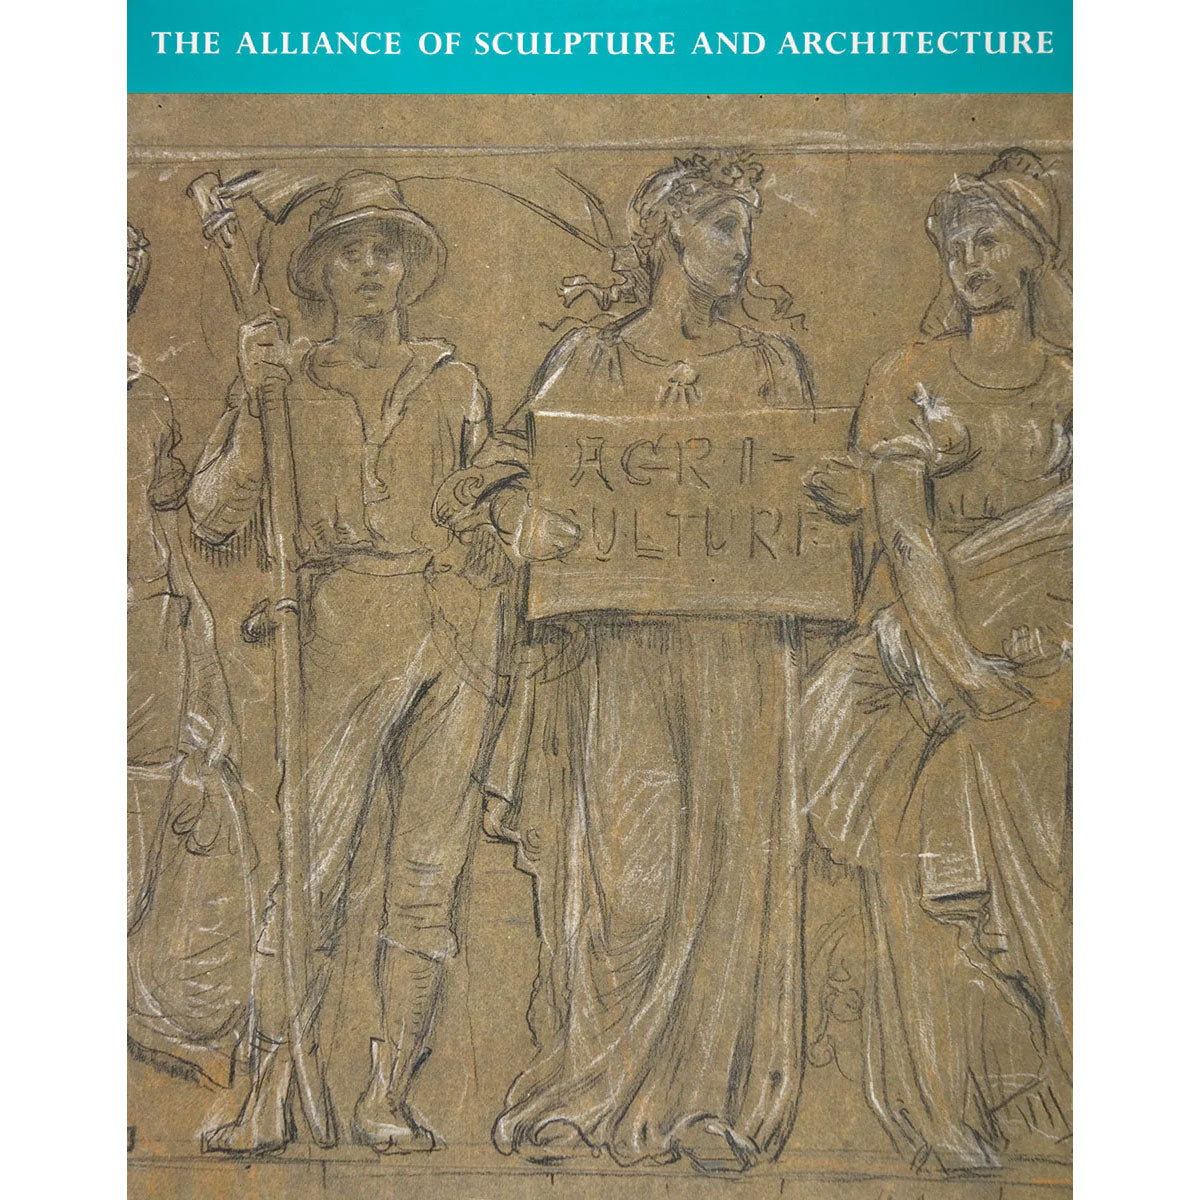 The Alliance of Sculpture and Architecture